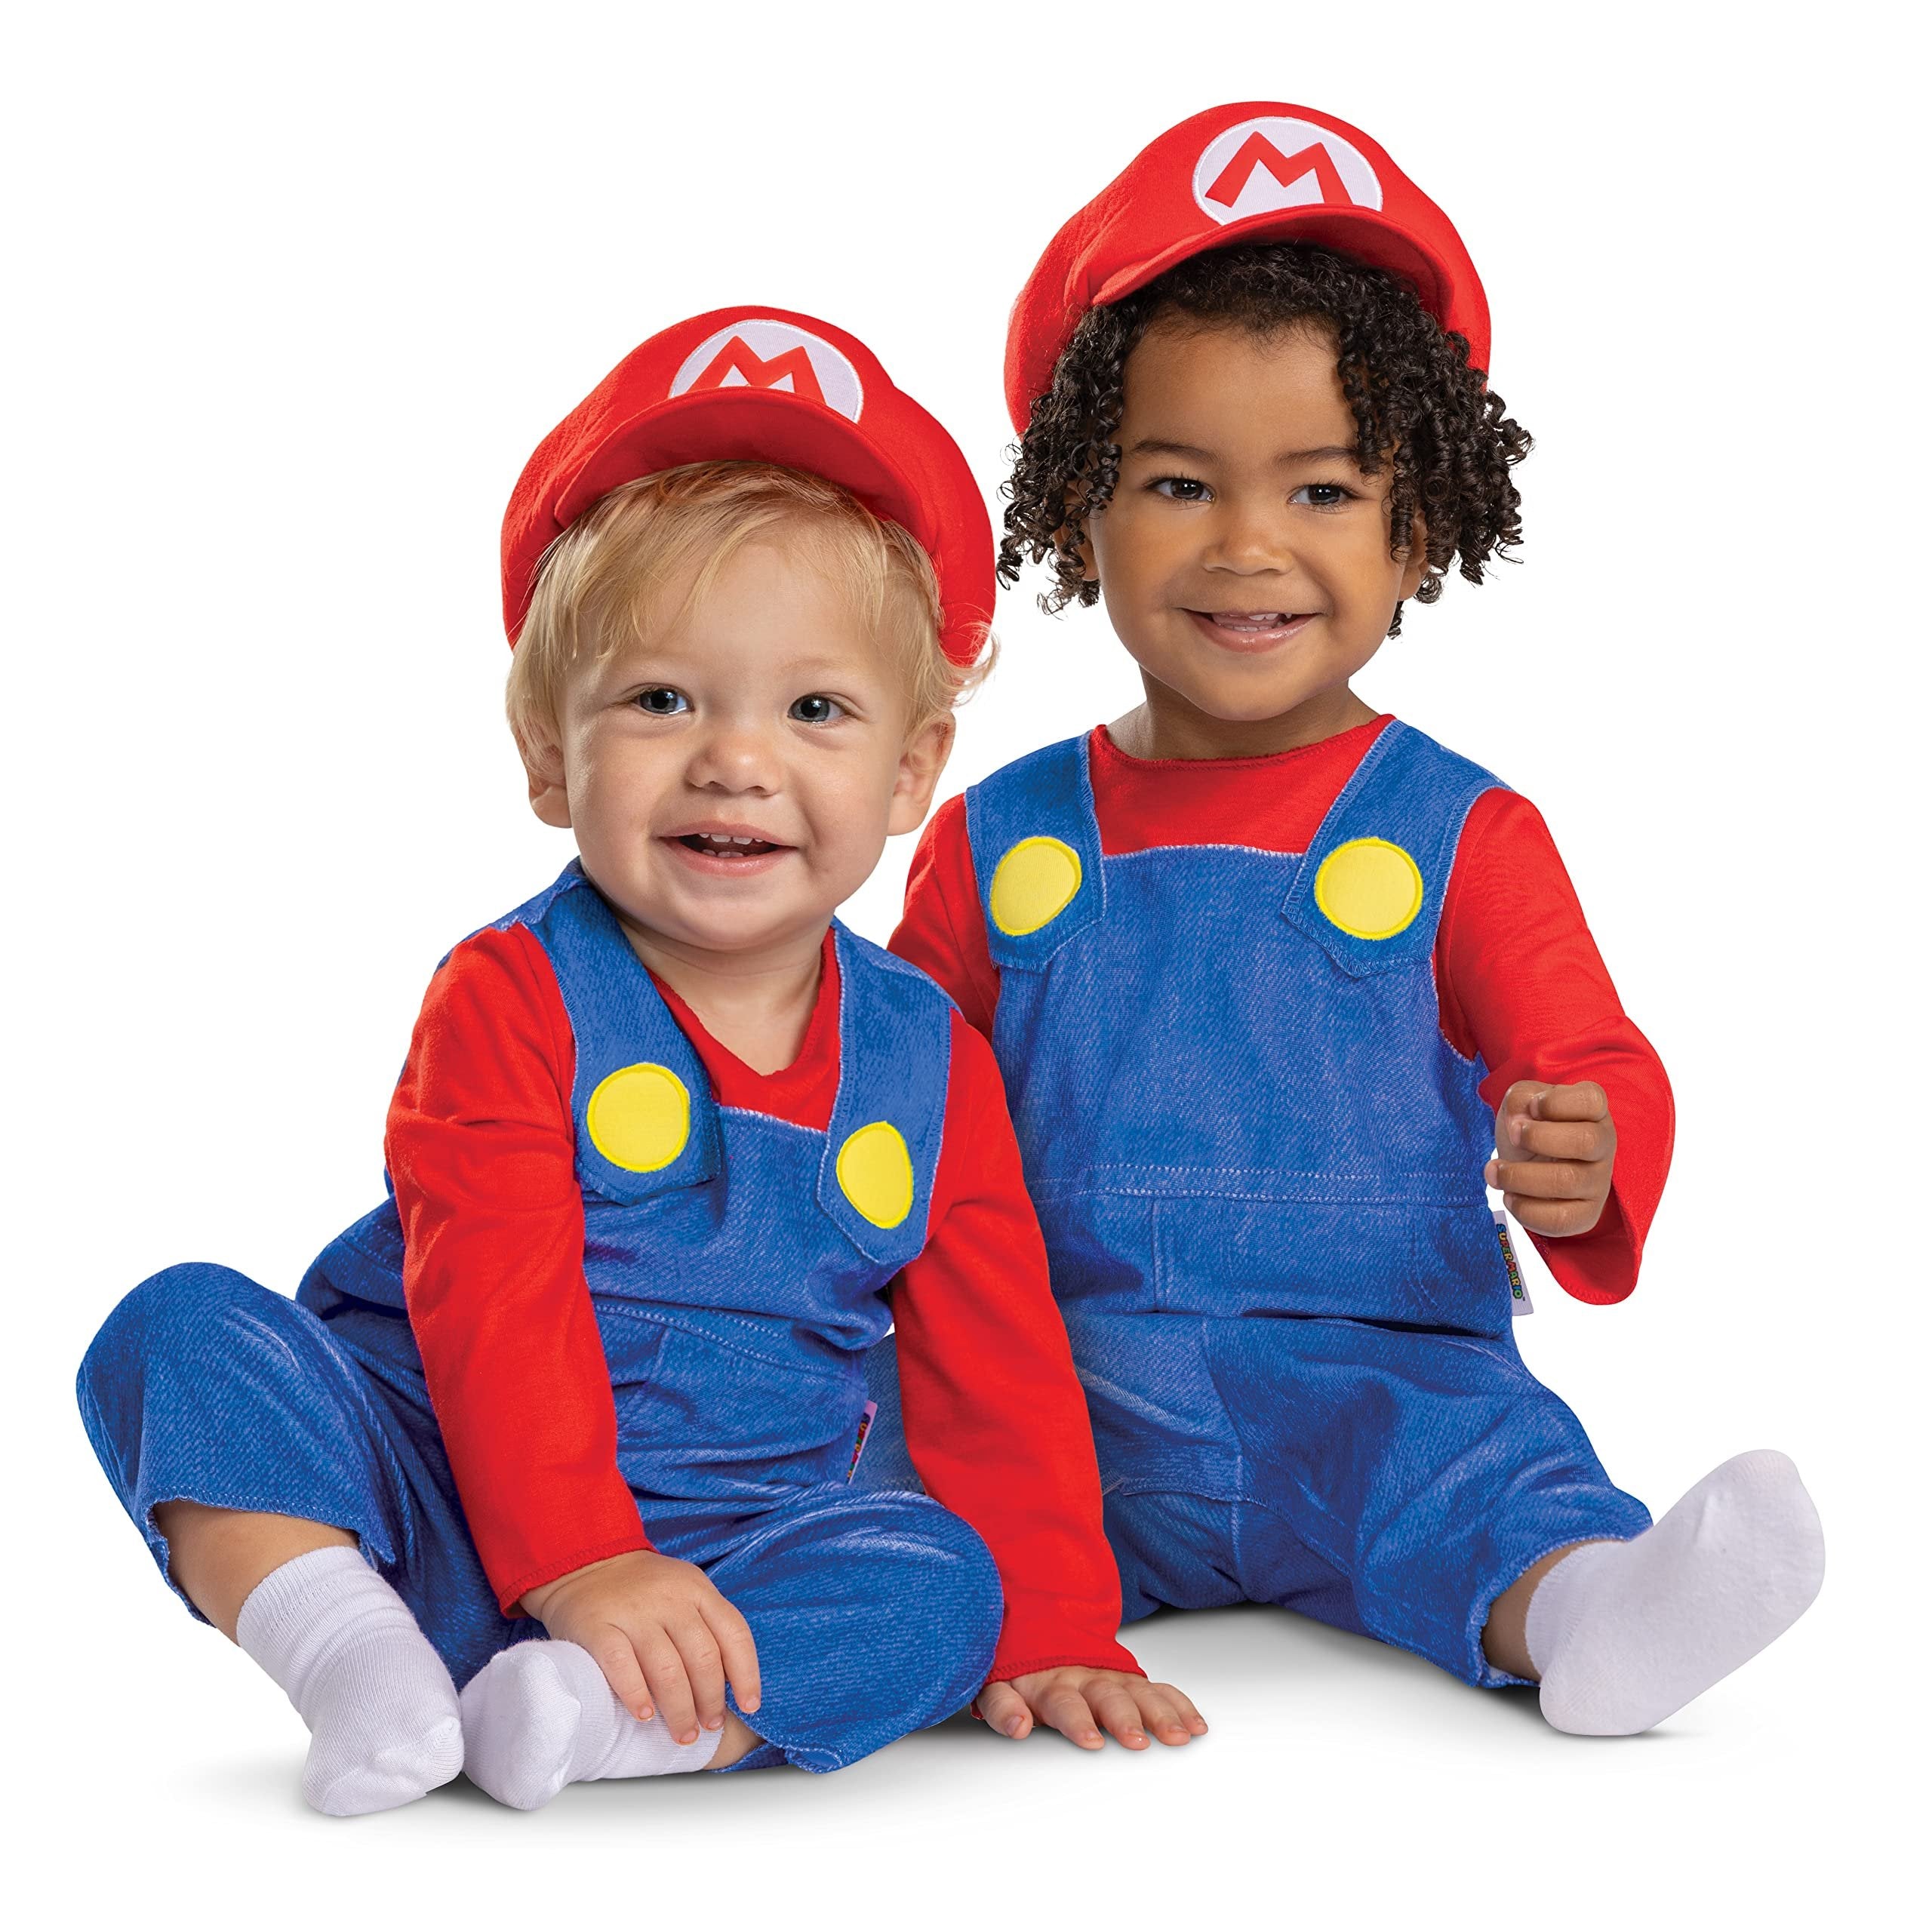 Disguise Infant Mario Costume, Official Super Mario Bros Outfit for Babies, Size (12-18 months)